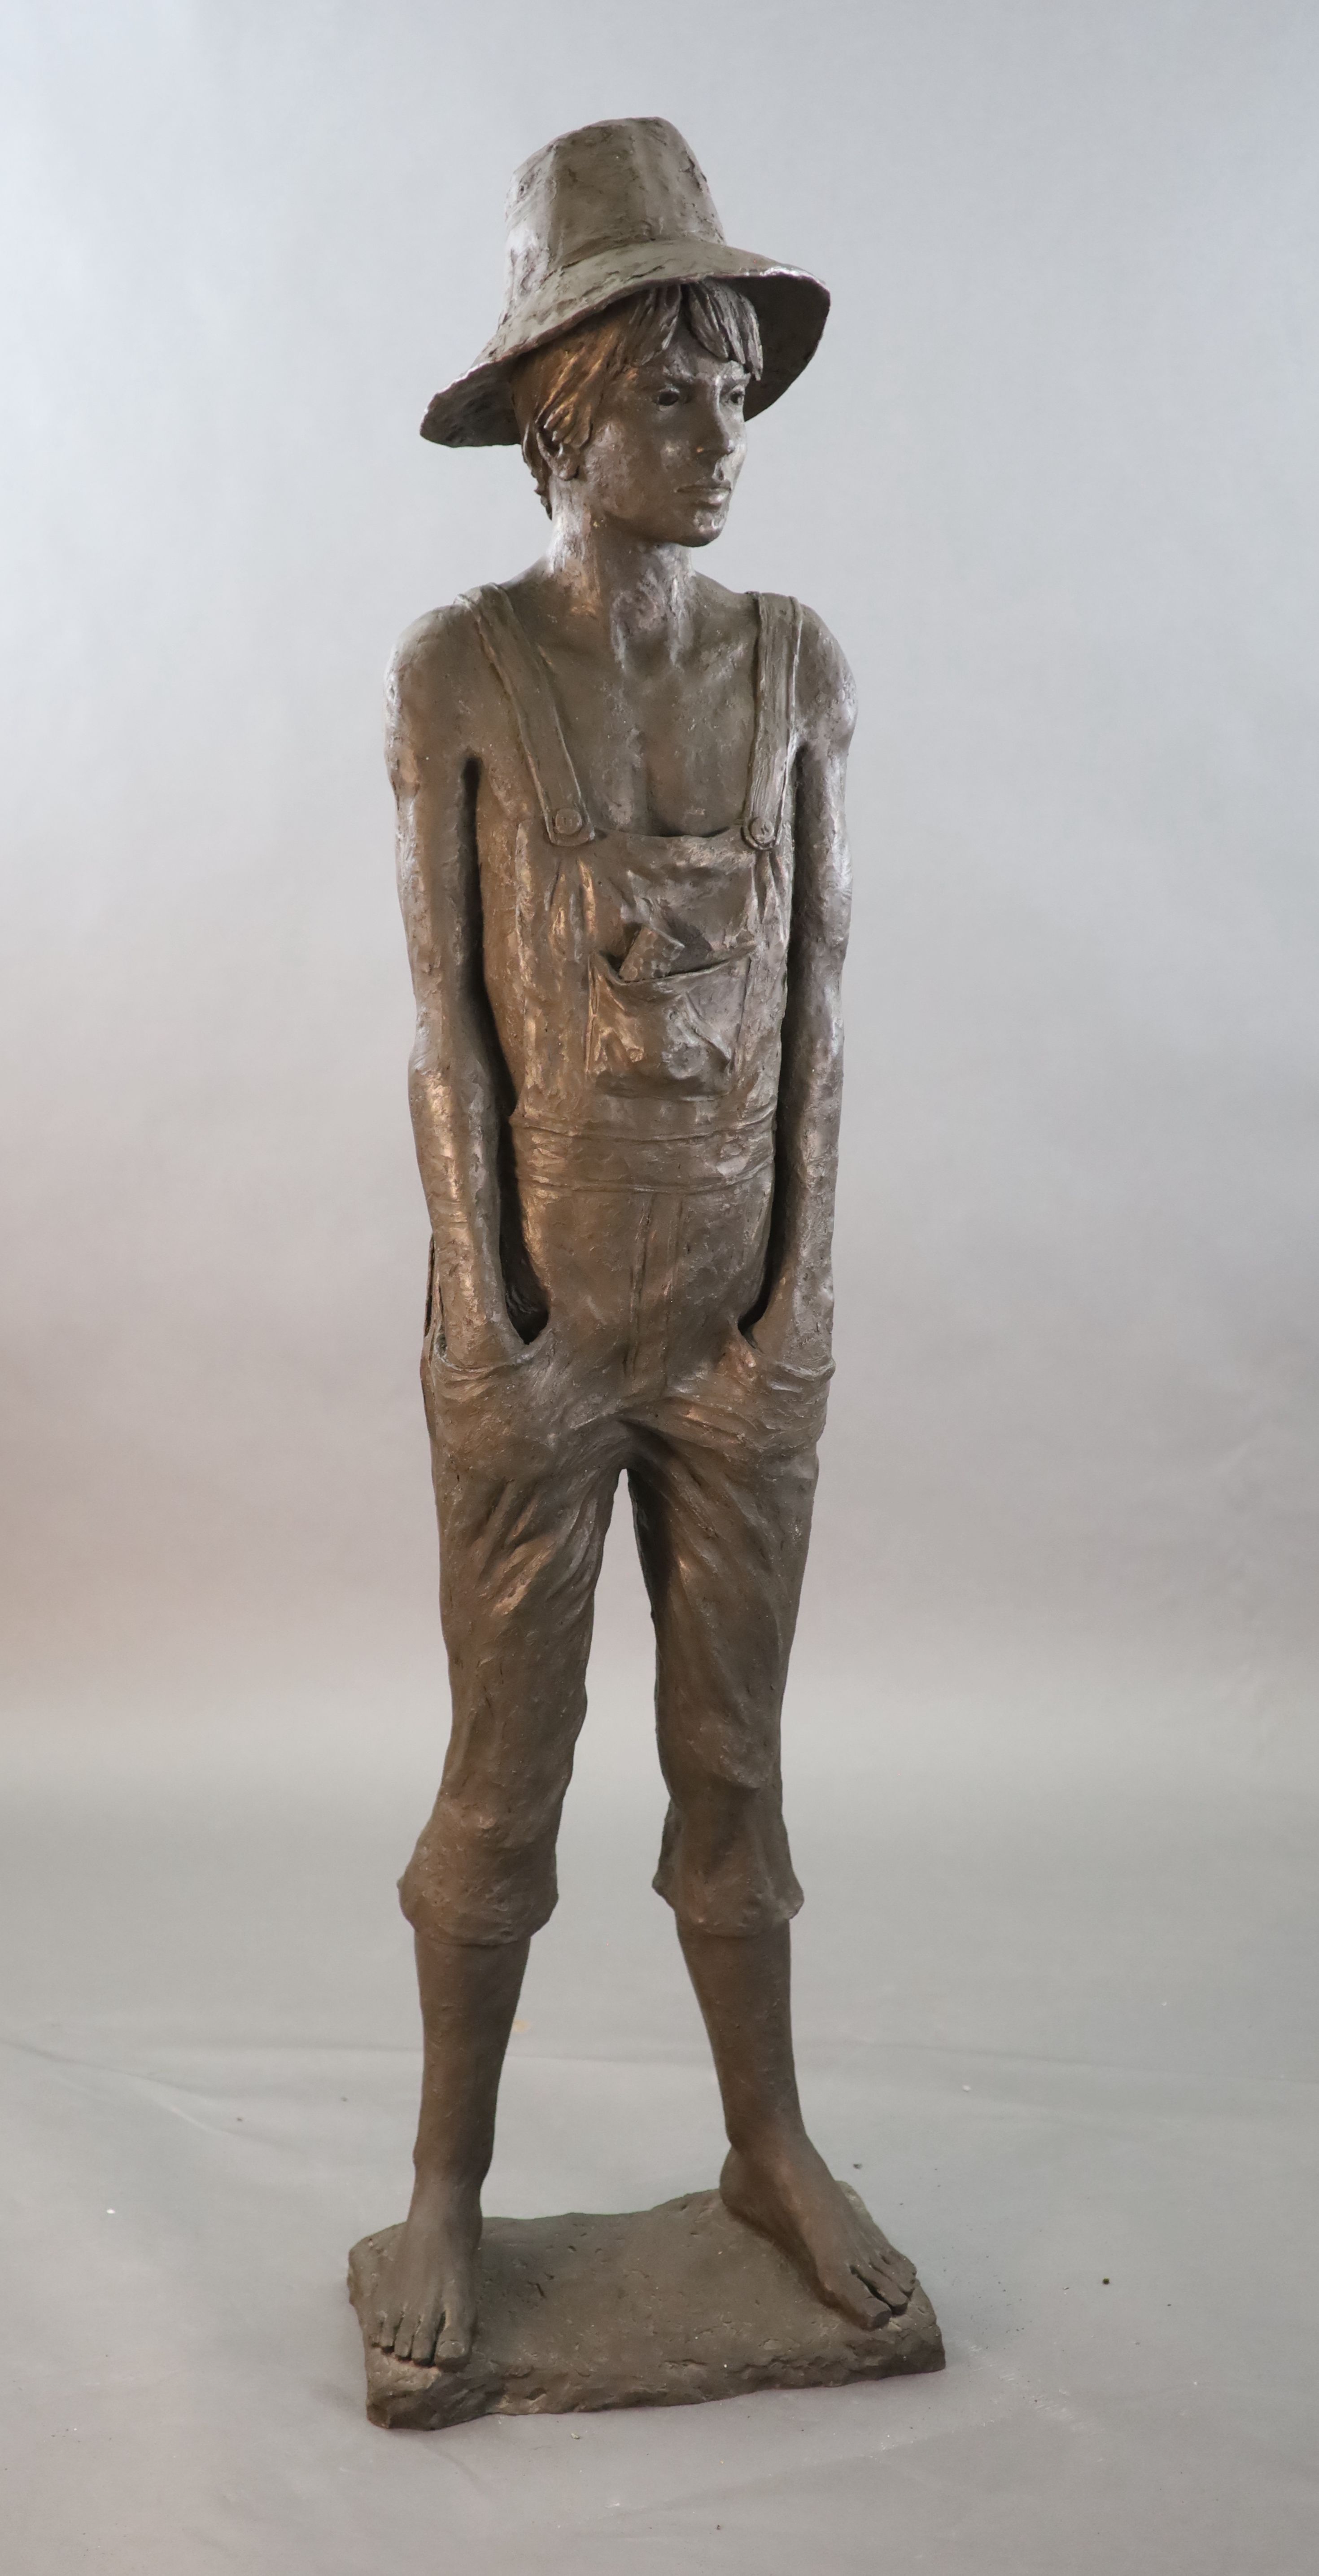 A Neil Godfrey bronzed composition life size figure of Tom Sawyer, height 5ft 2in.